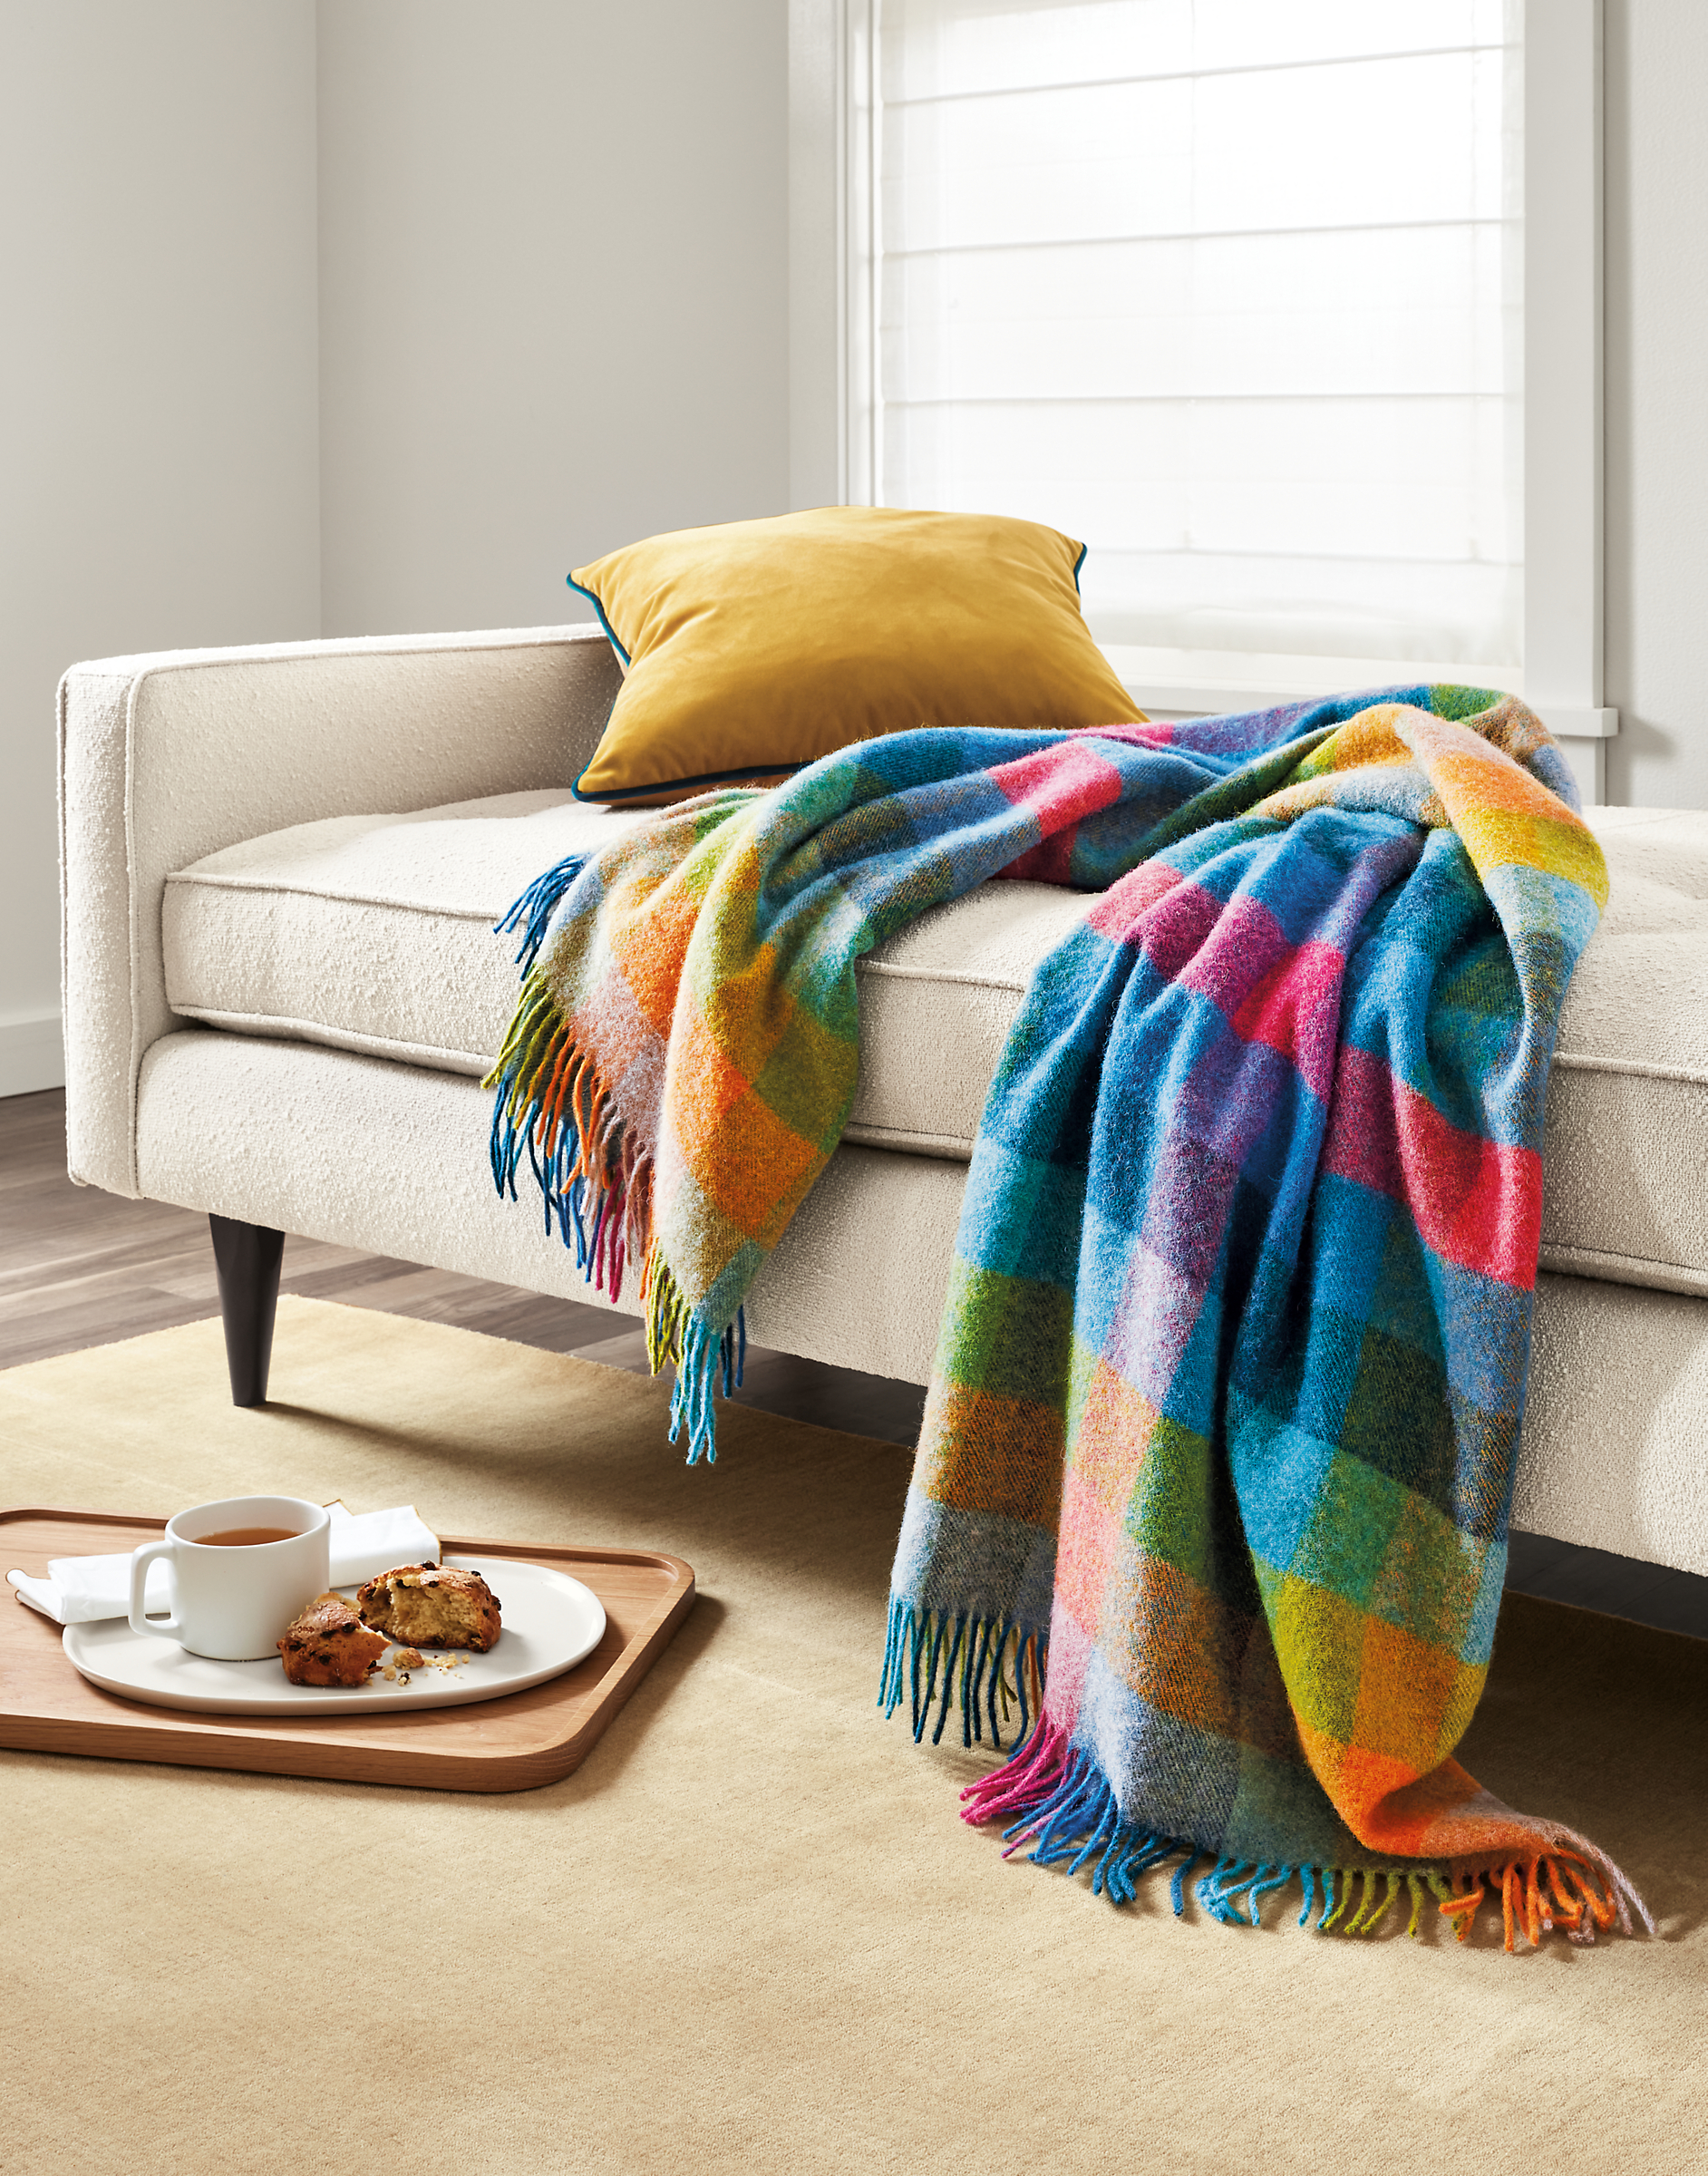 Detail of colorful Clare throw blanket, Reese daybed and Felix pillow in mustard.